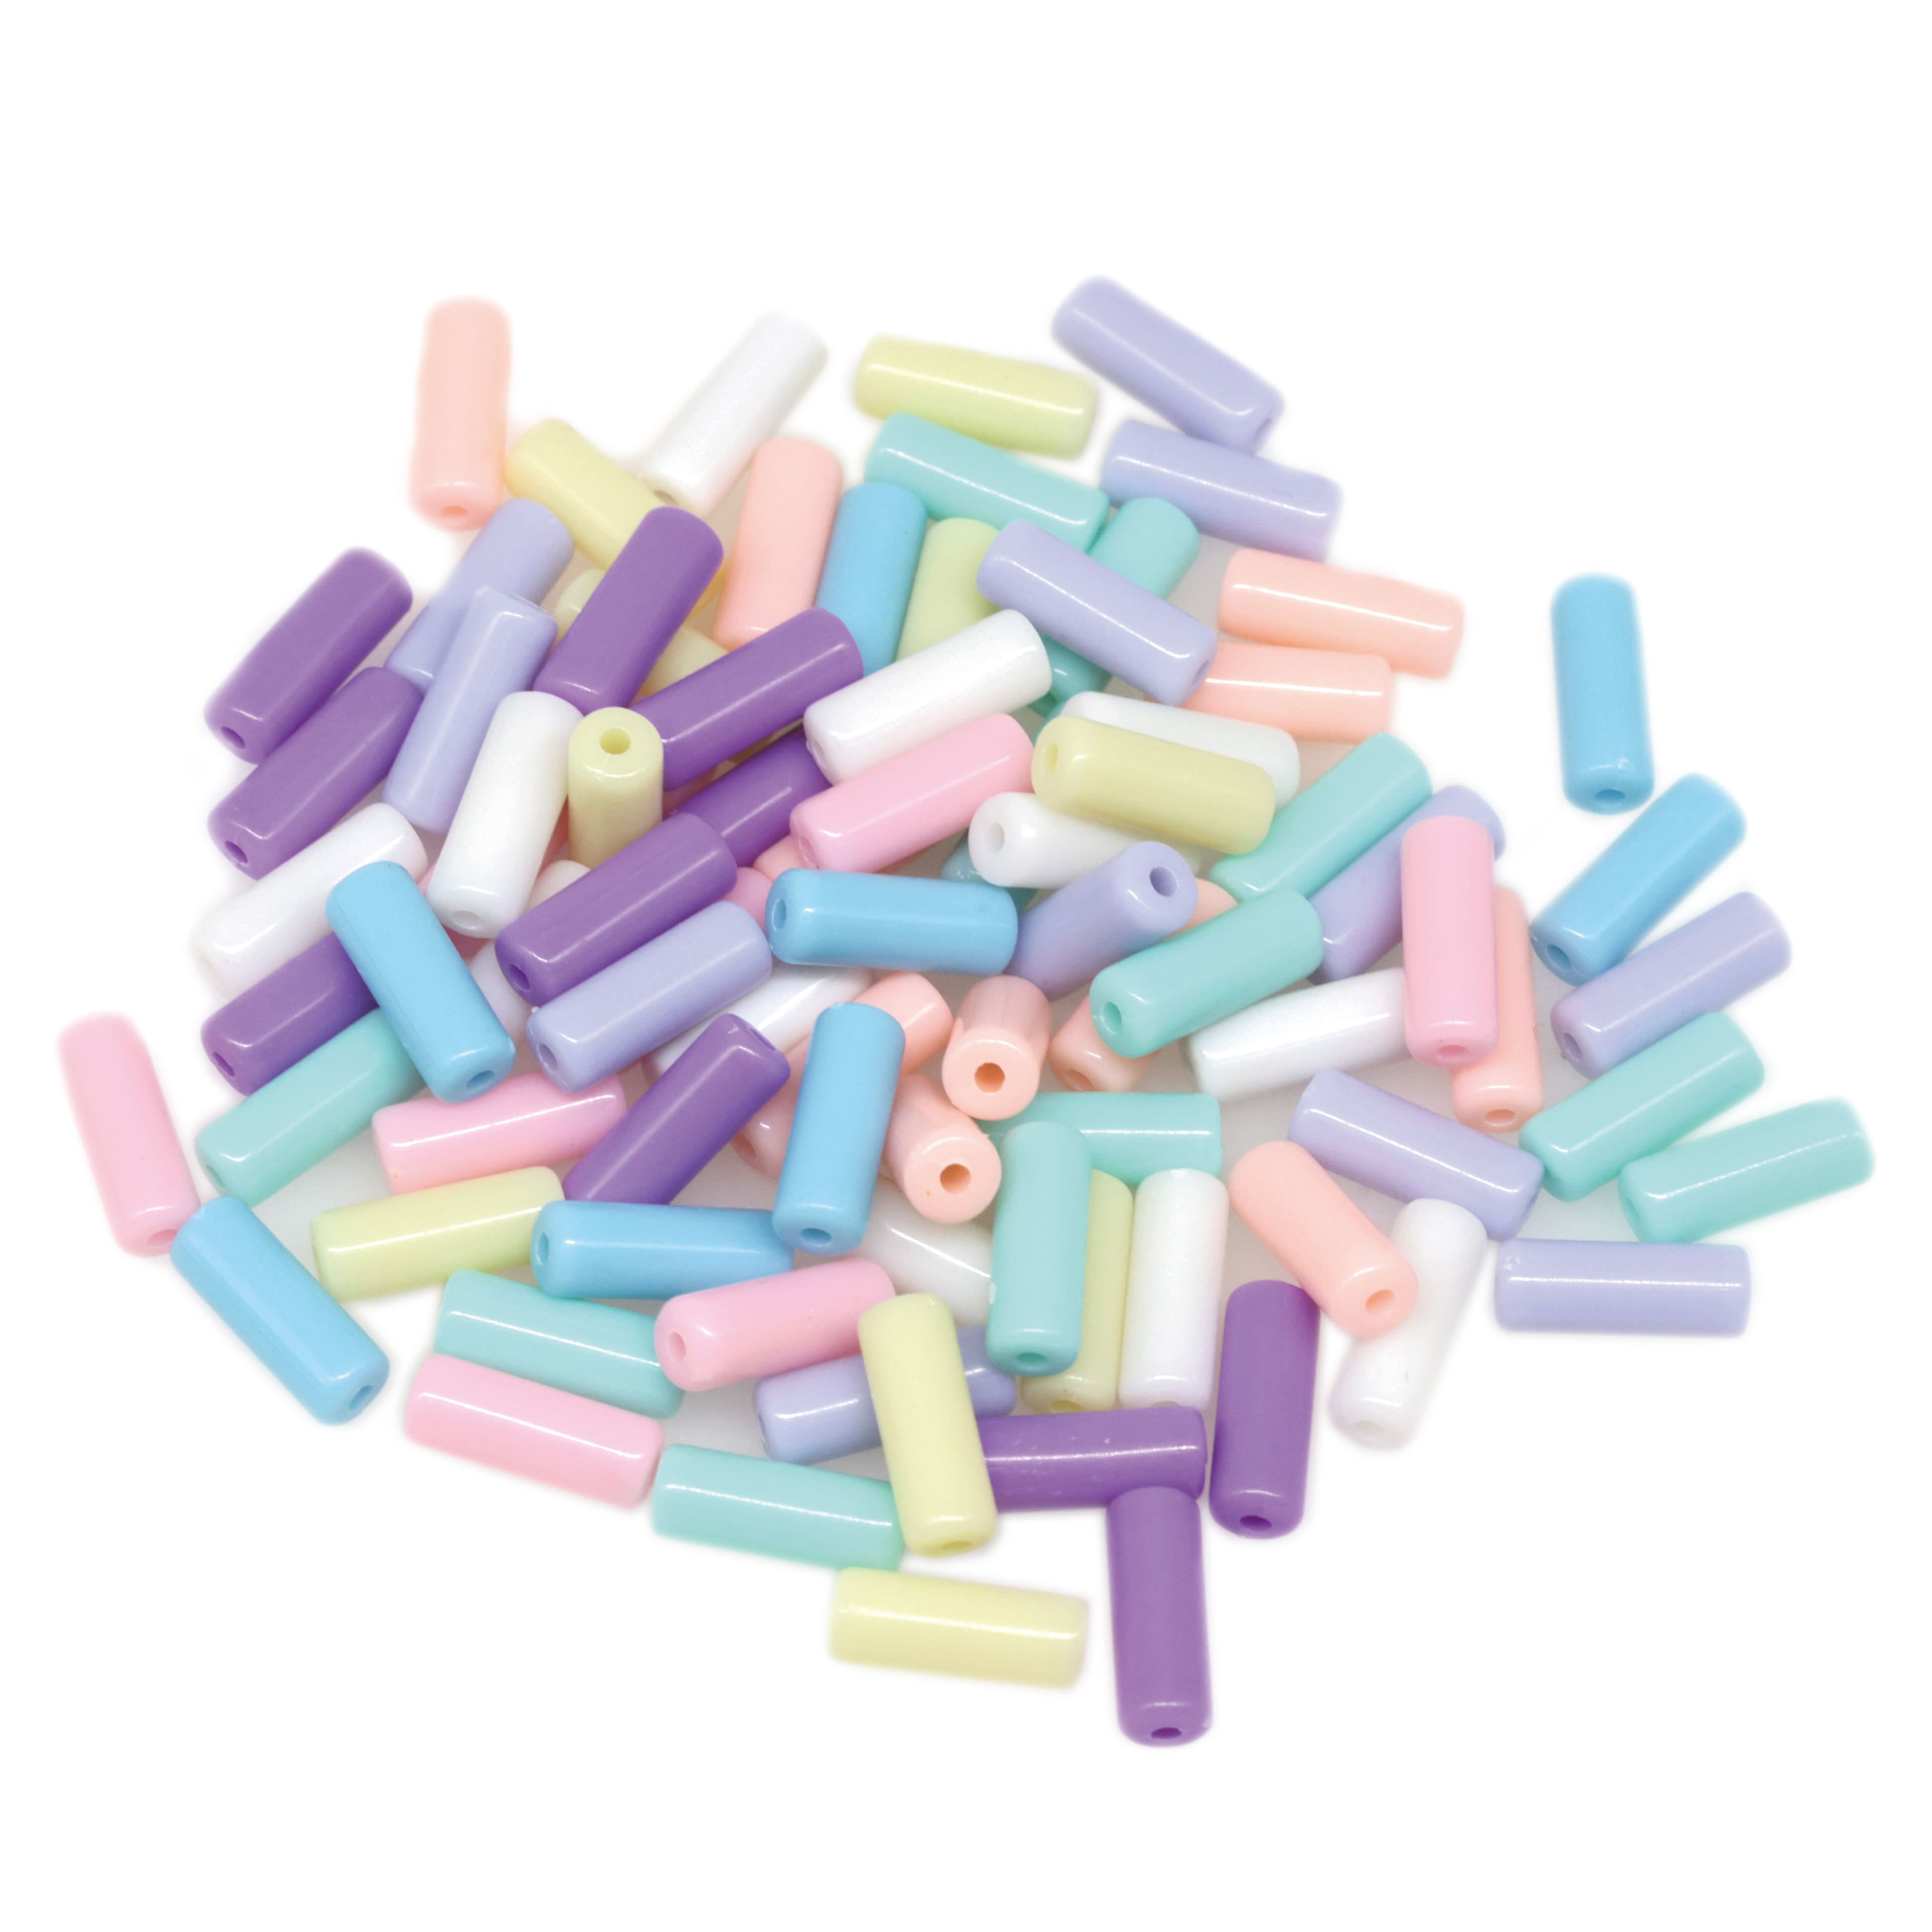 12 Packs: 280 ct. (3,360 total) Pastel Plastic Tube Beads by Creatology™,  12.5mm x 5mm 